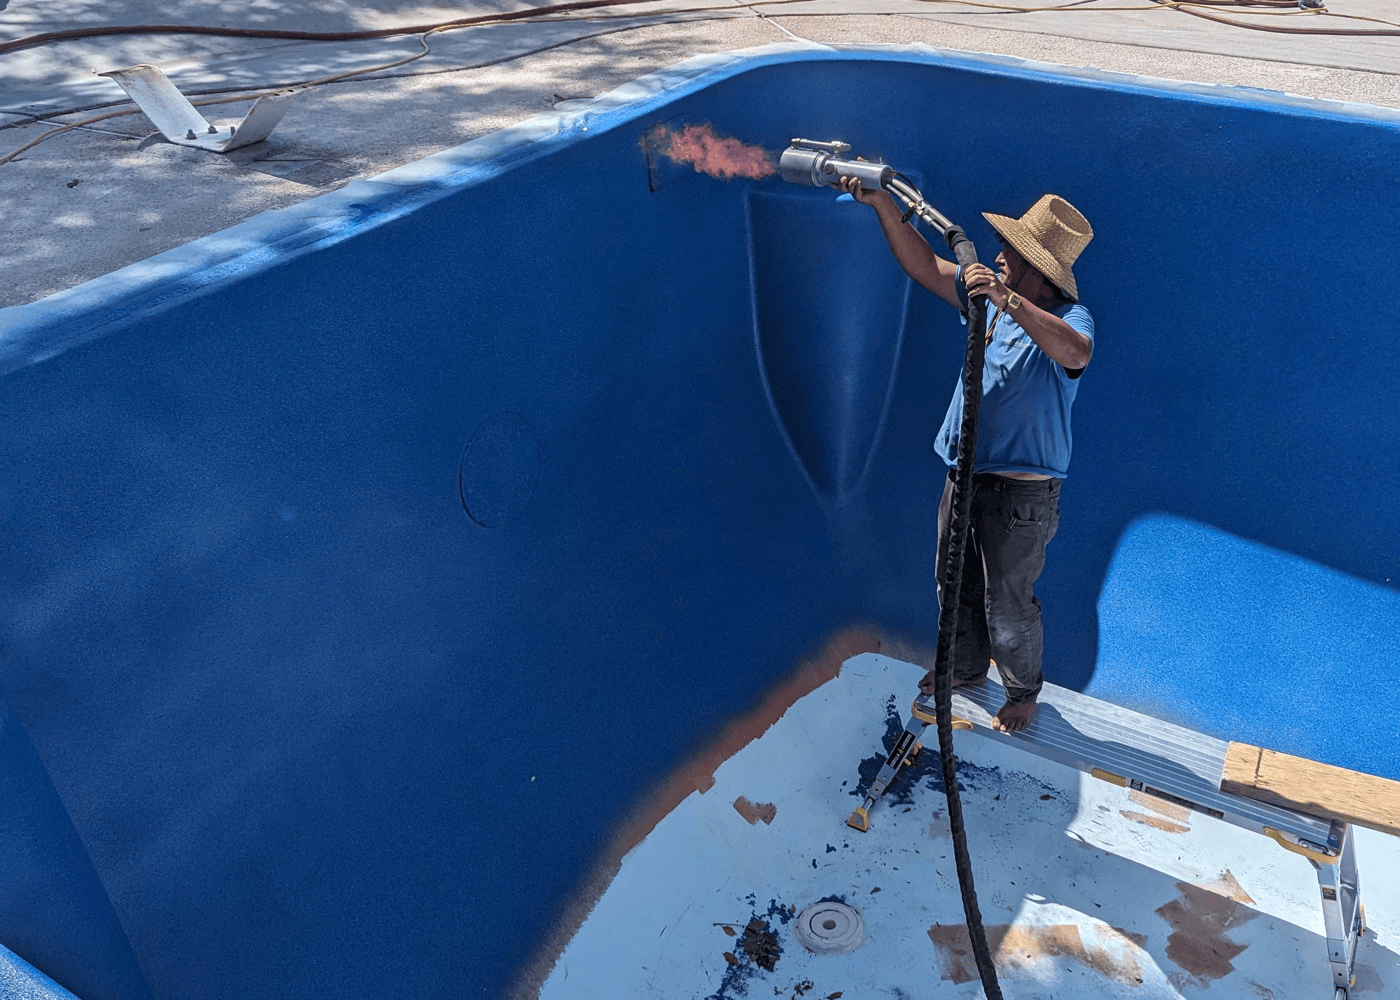 An in-ground fiberglass pool being coated with ecoFINISH polyFIBRO in Pacific Blue. Workers are applying the vibrant blue coating to the pool's surface.